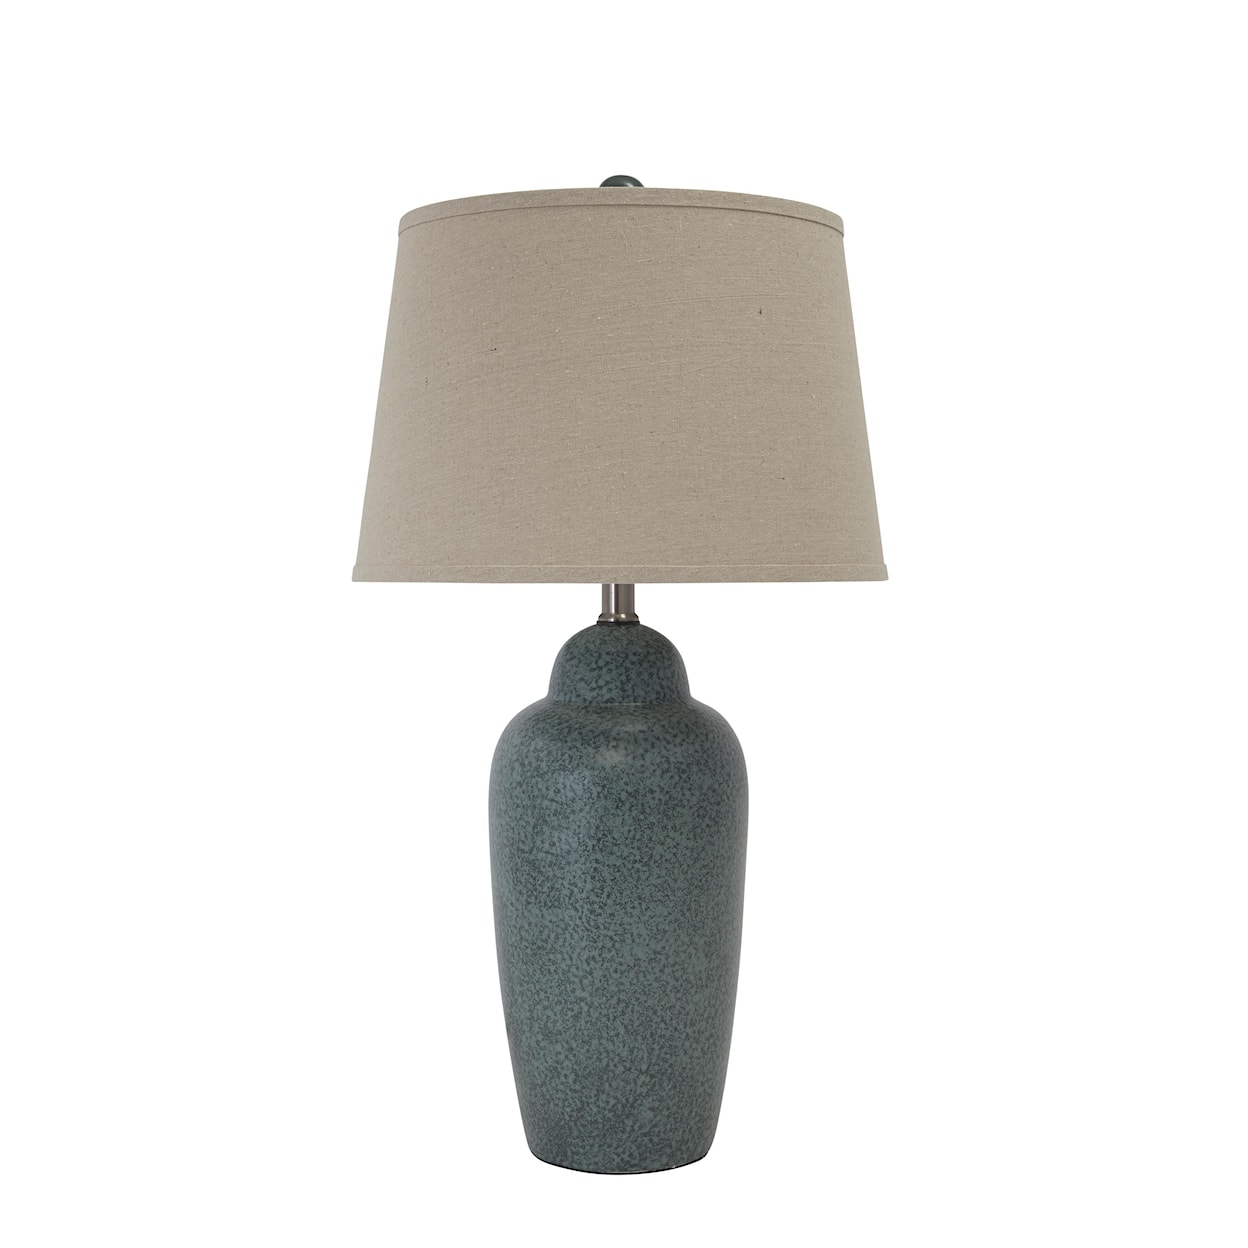 Signature Design by Ashley Lamps - Contemporary Ceramic Table Lamp 